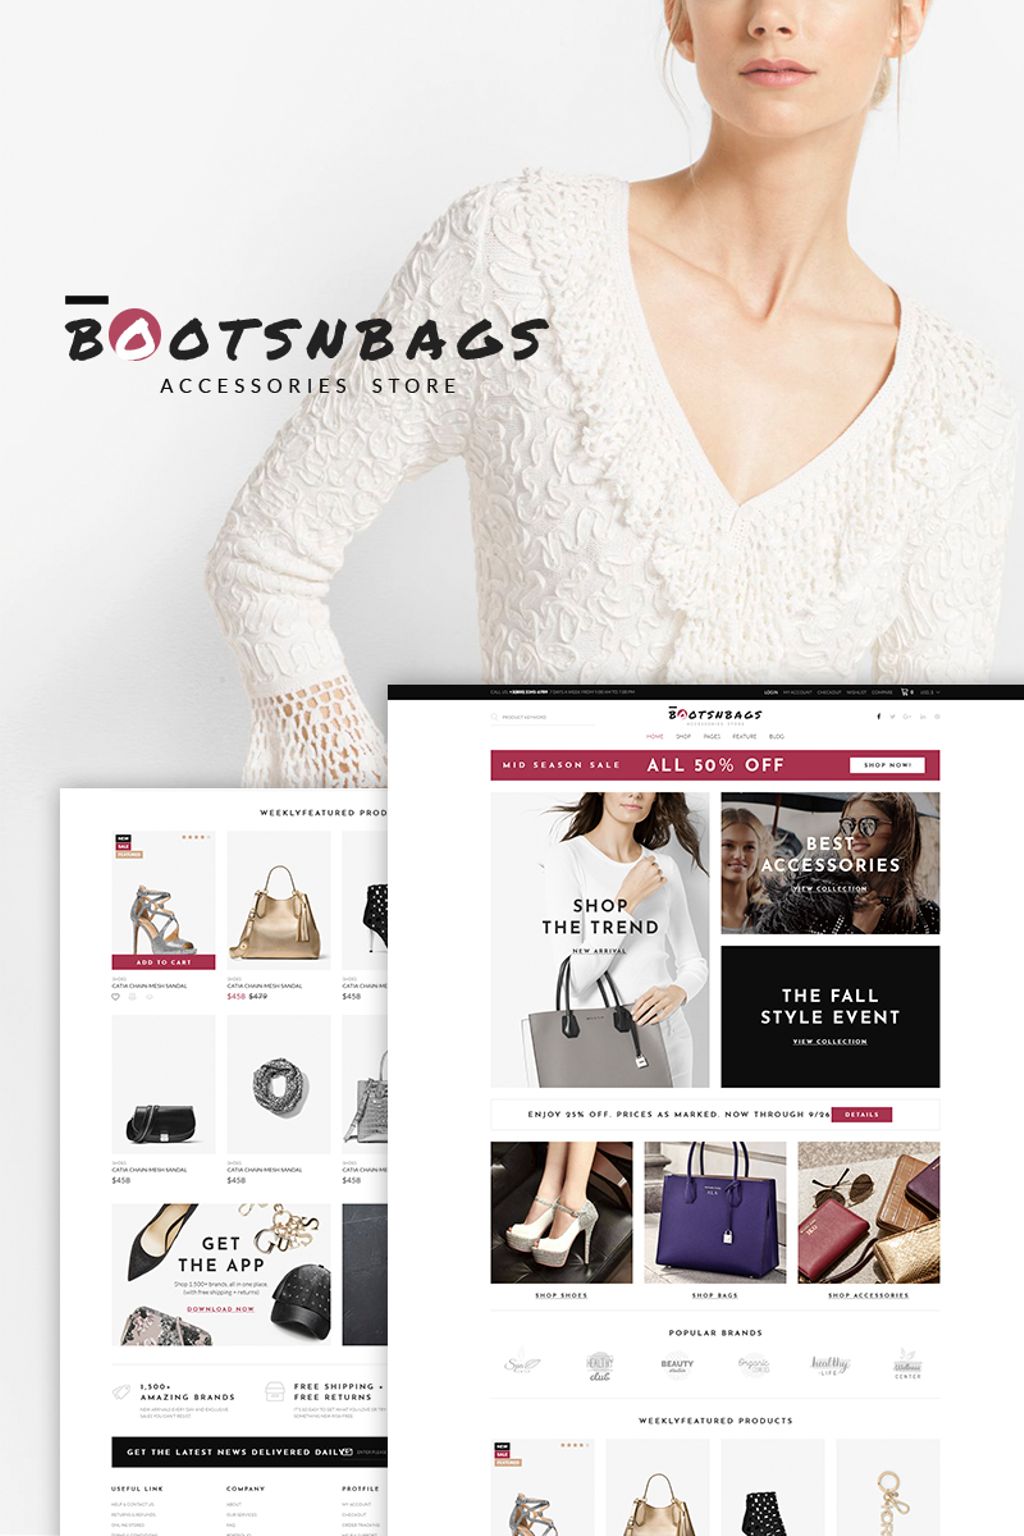 BootsnBags - Accessories Store WooCommerce Theme